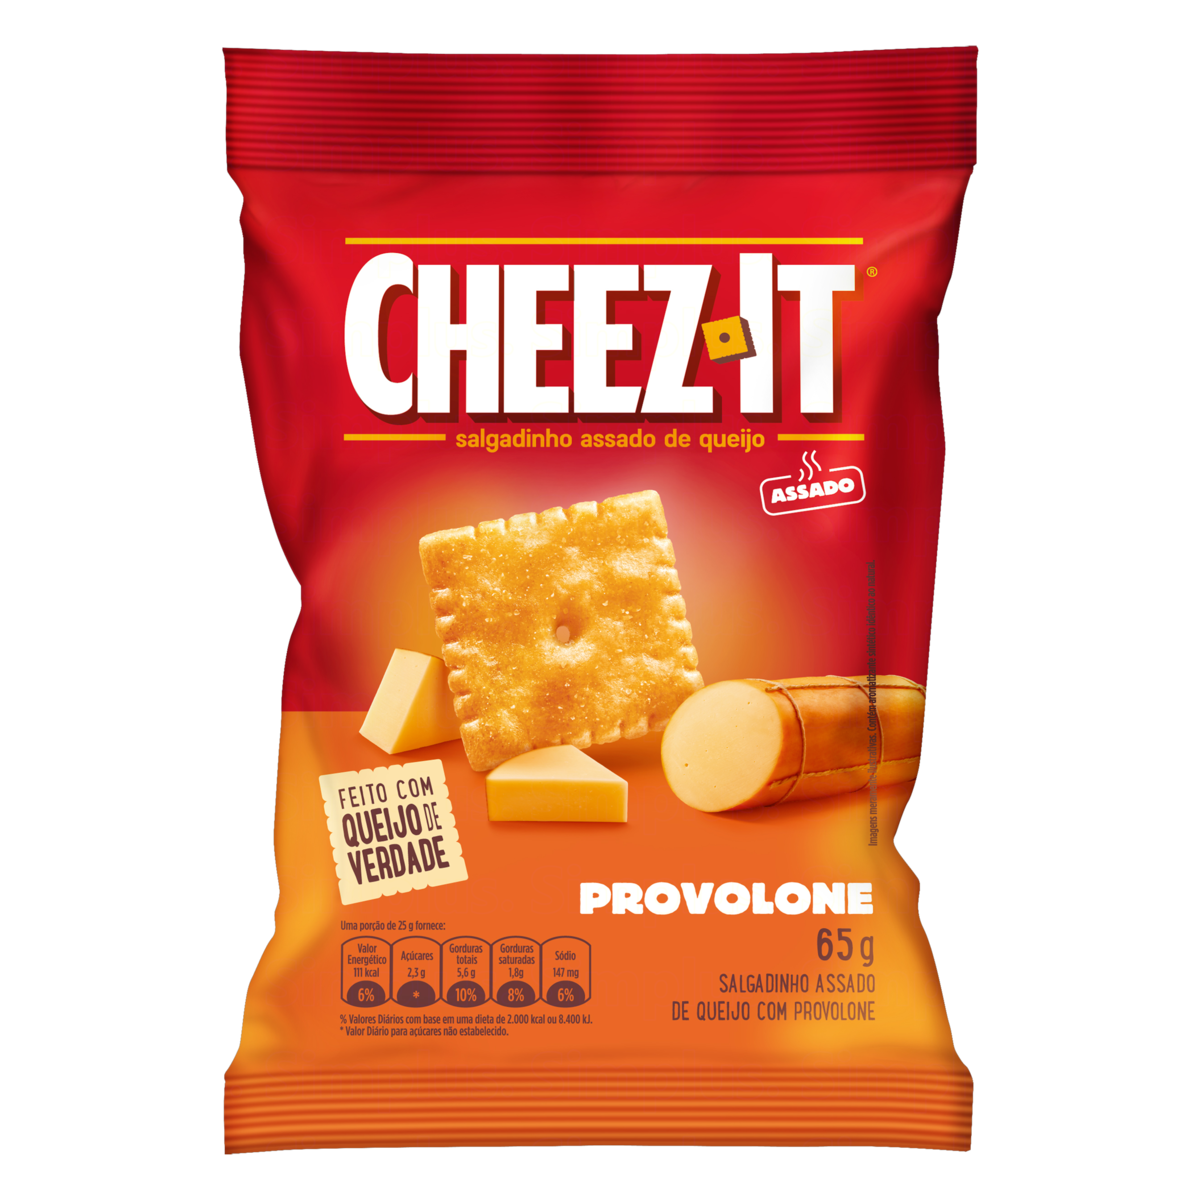 7896004007069 - SNACK PROVOLONE CHEEZ-IT PACOTE 65G